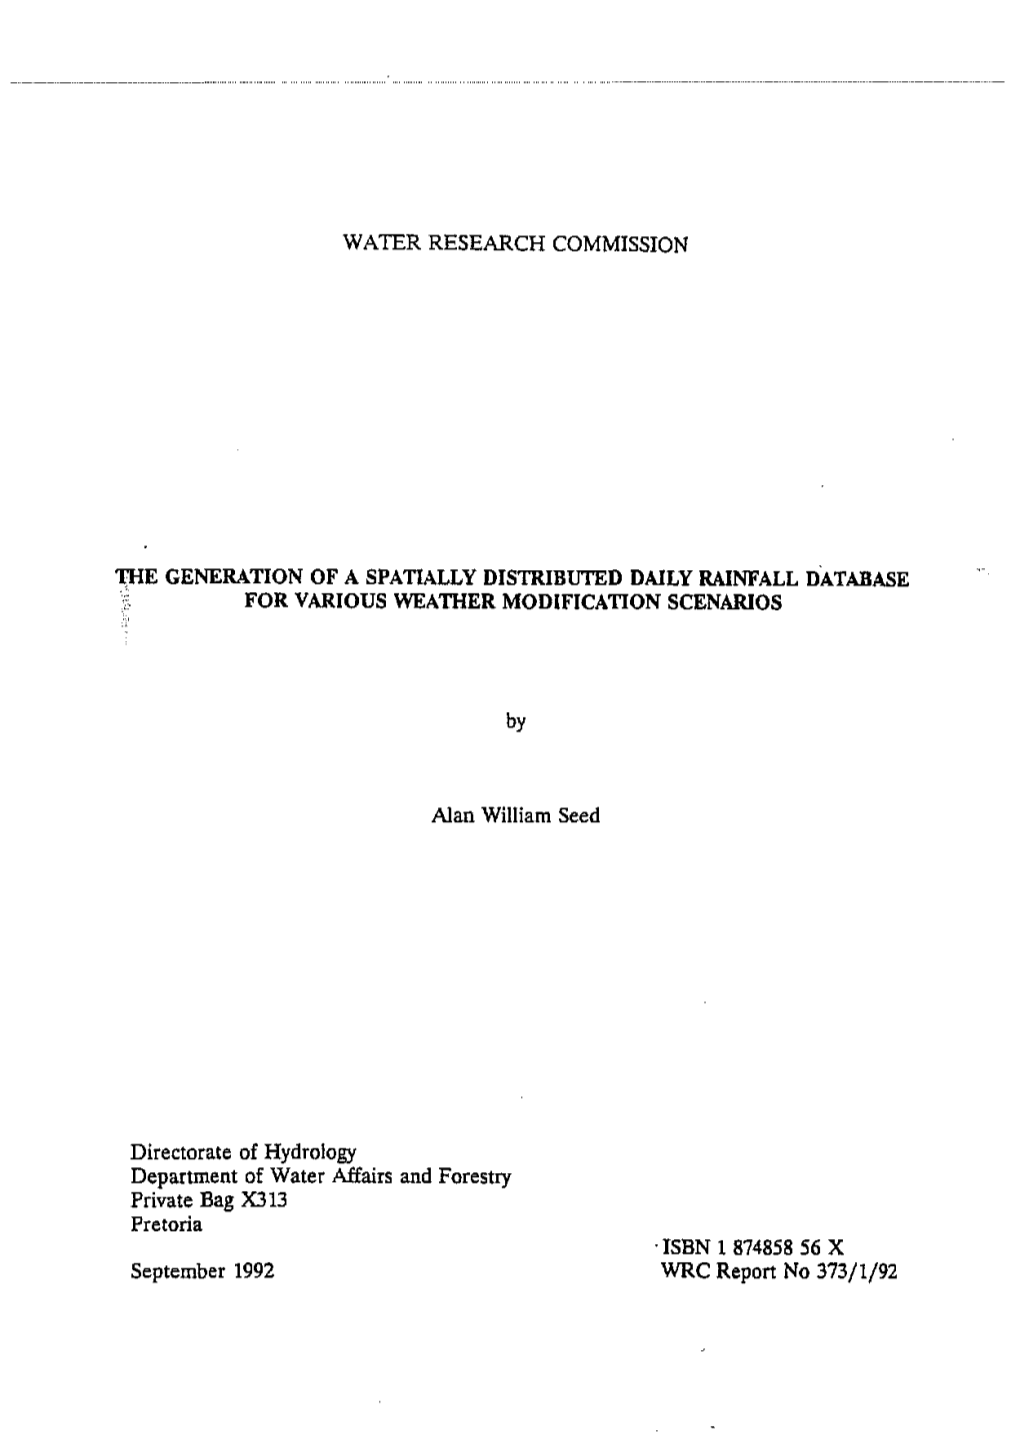 WATER RESEARCH COMMISSION by Alan William Seed Directorate Of